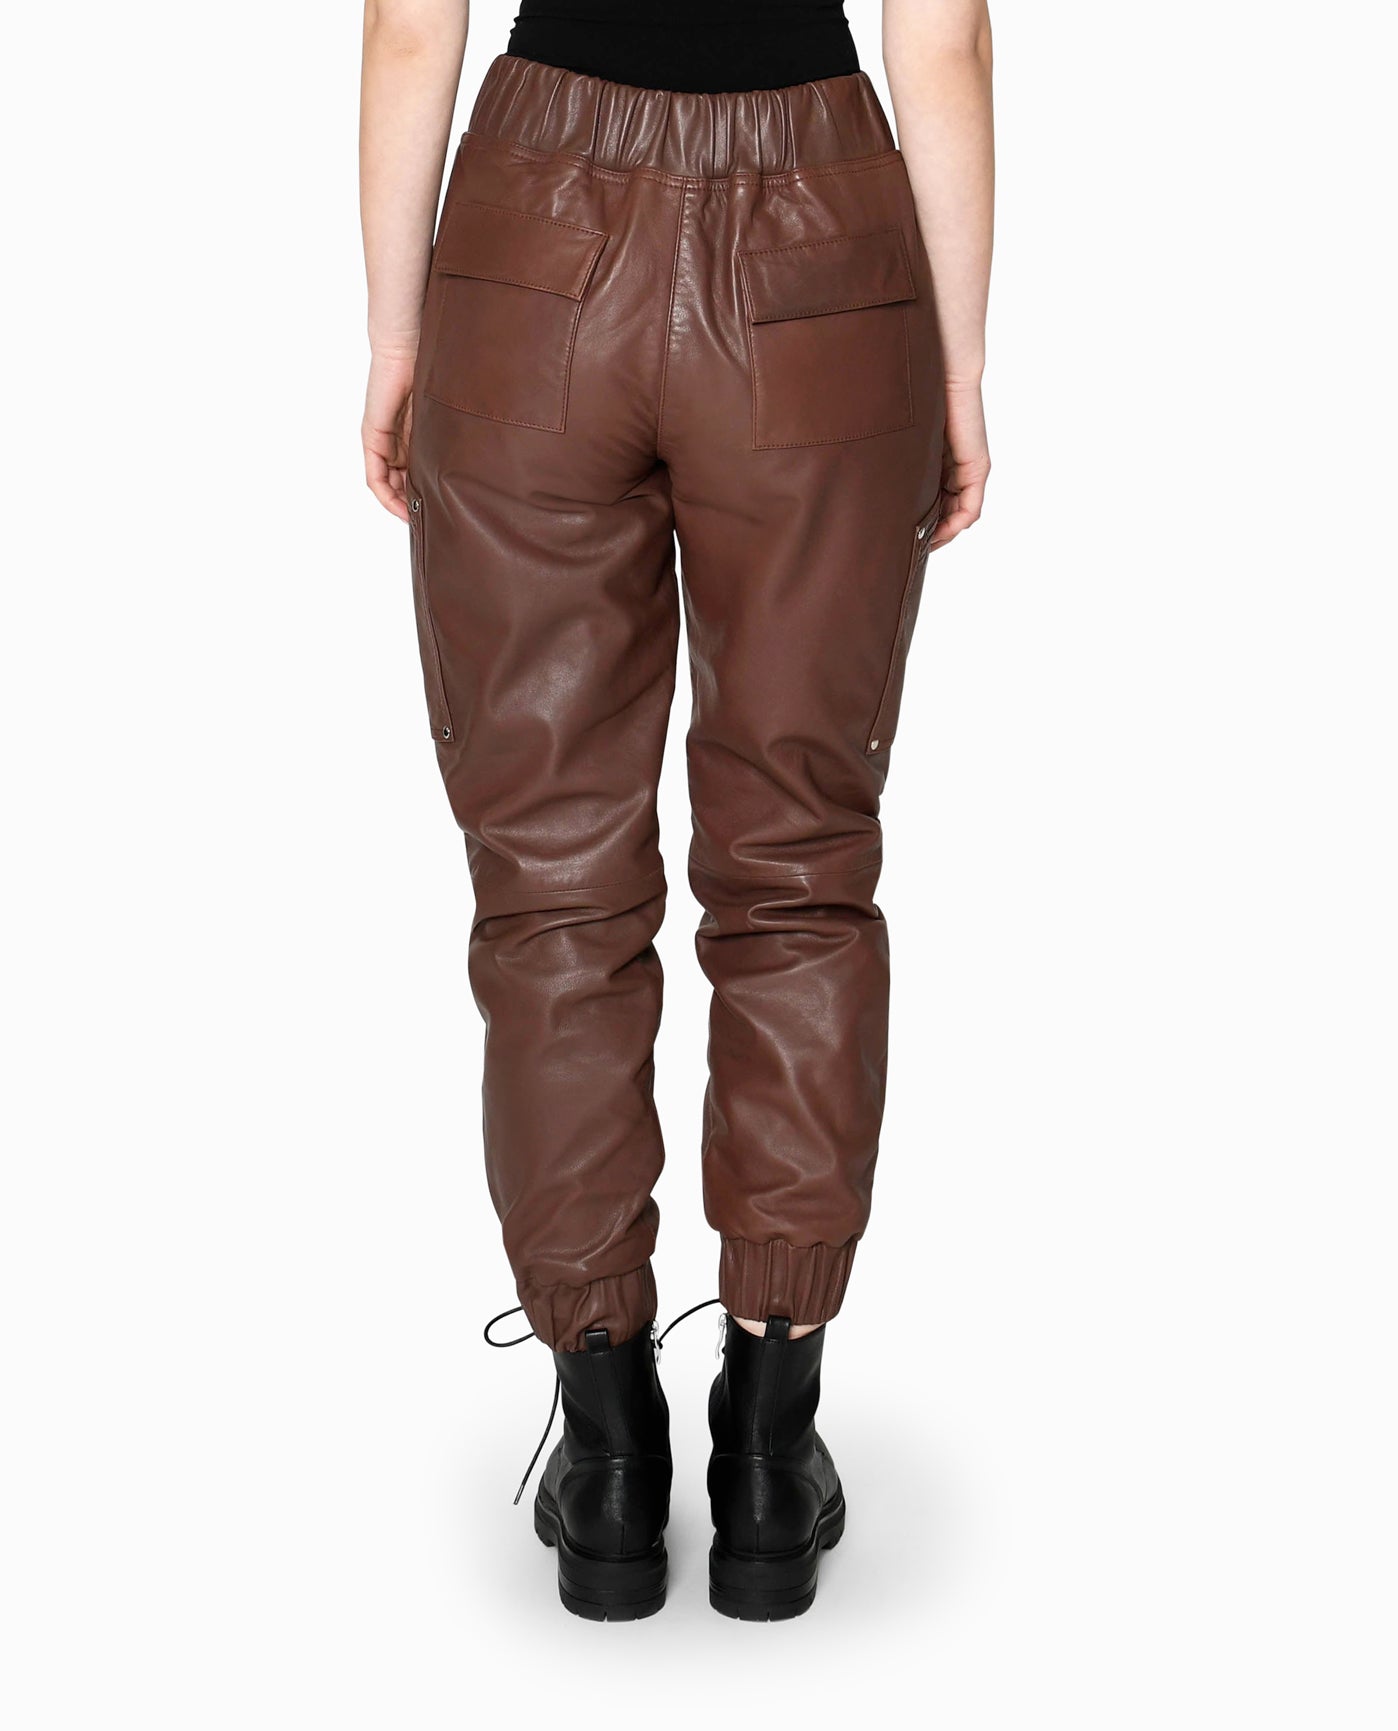 BACK OF LEATHER SPACE JOGGER | BROWN